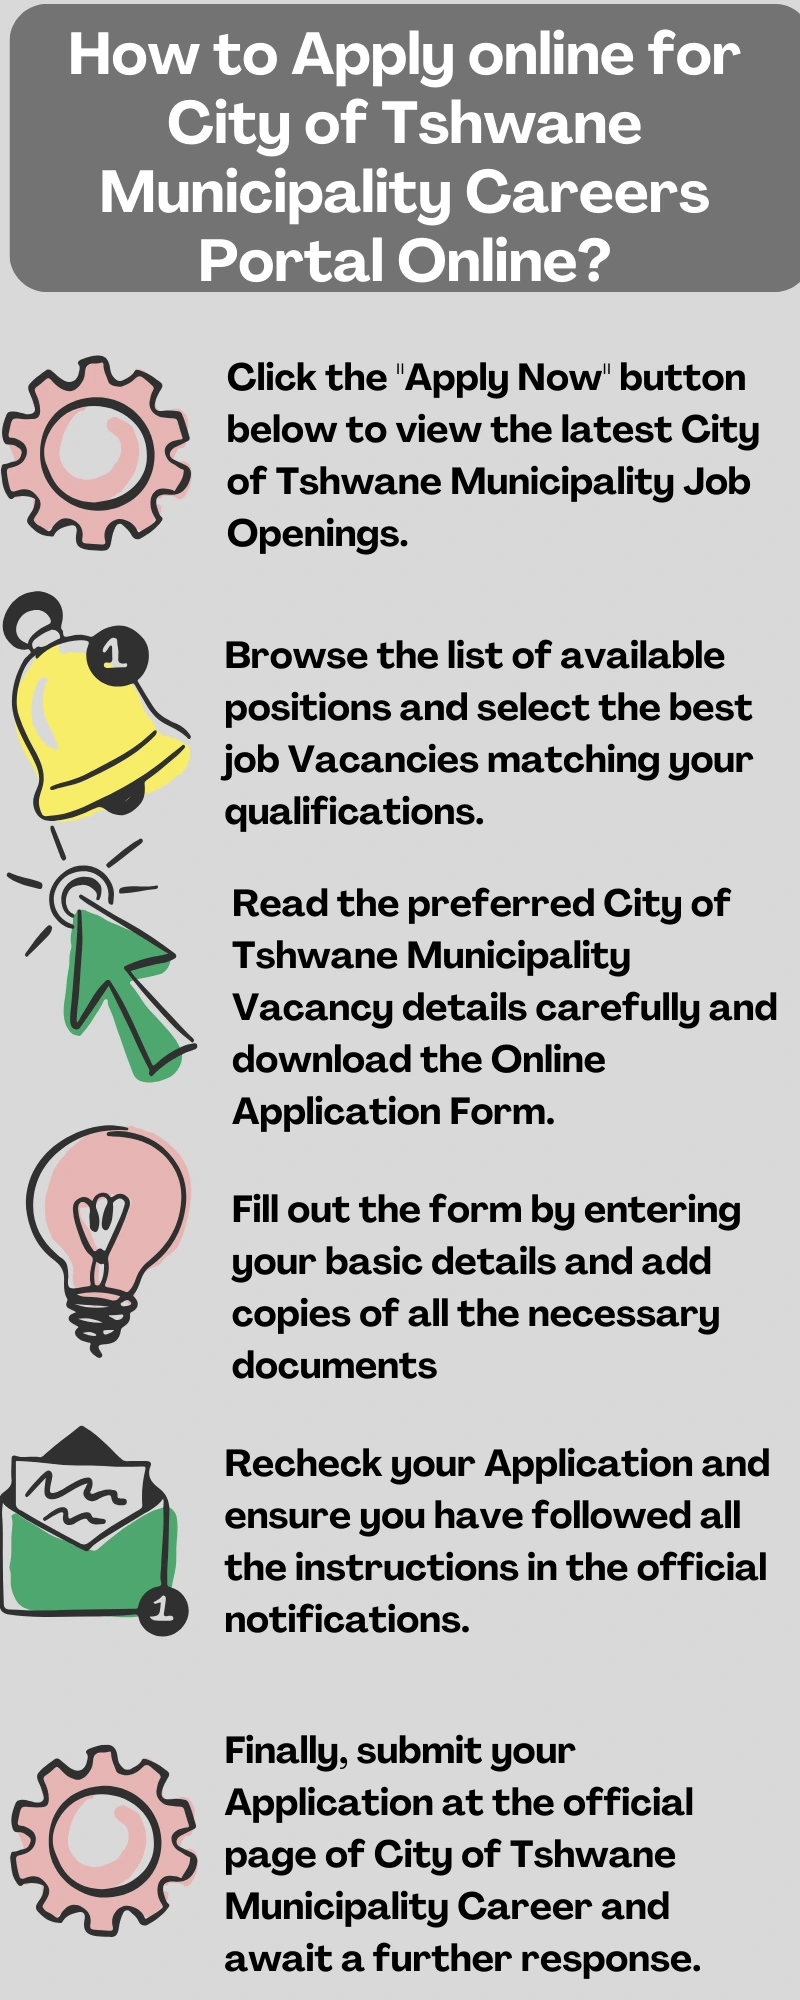 How to Apply online for City of Tshwane Municipality Careers Portal Online?